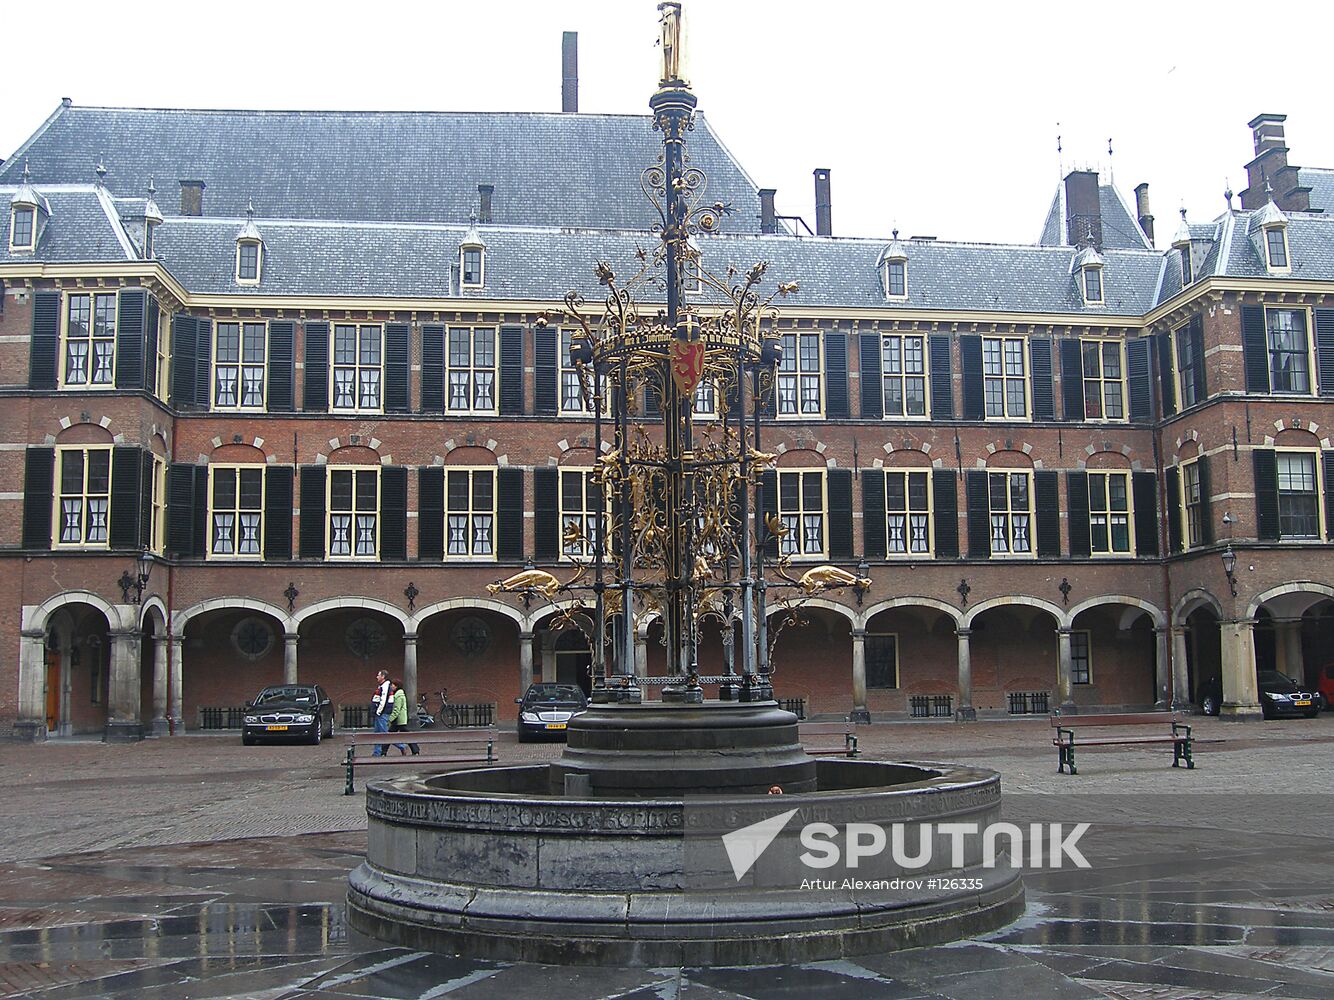 HISTORICAL CENTER OF THE HAGUE